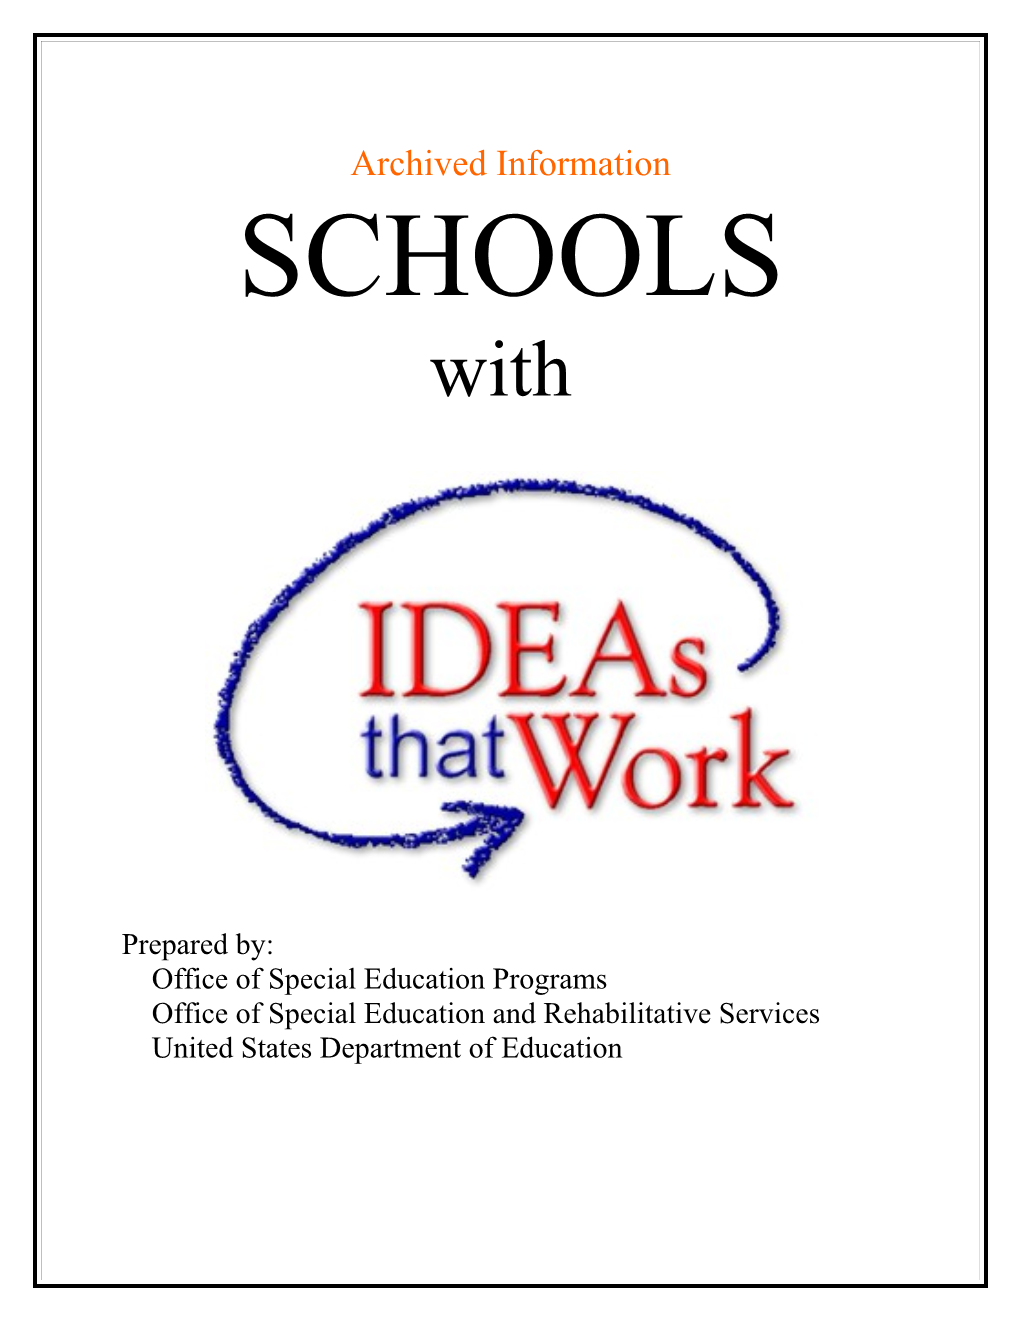 Archived Schools with Ideas That Work